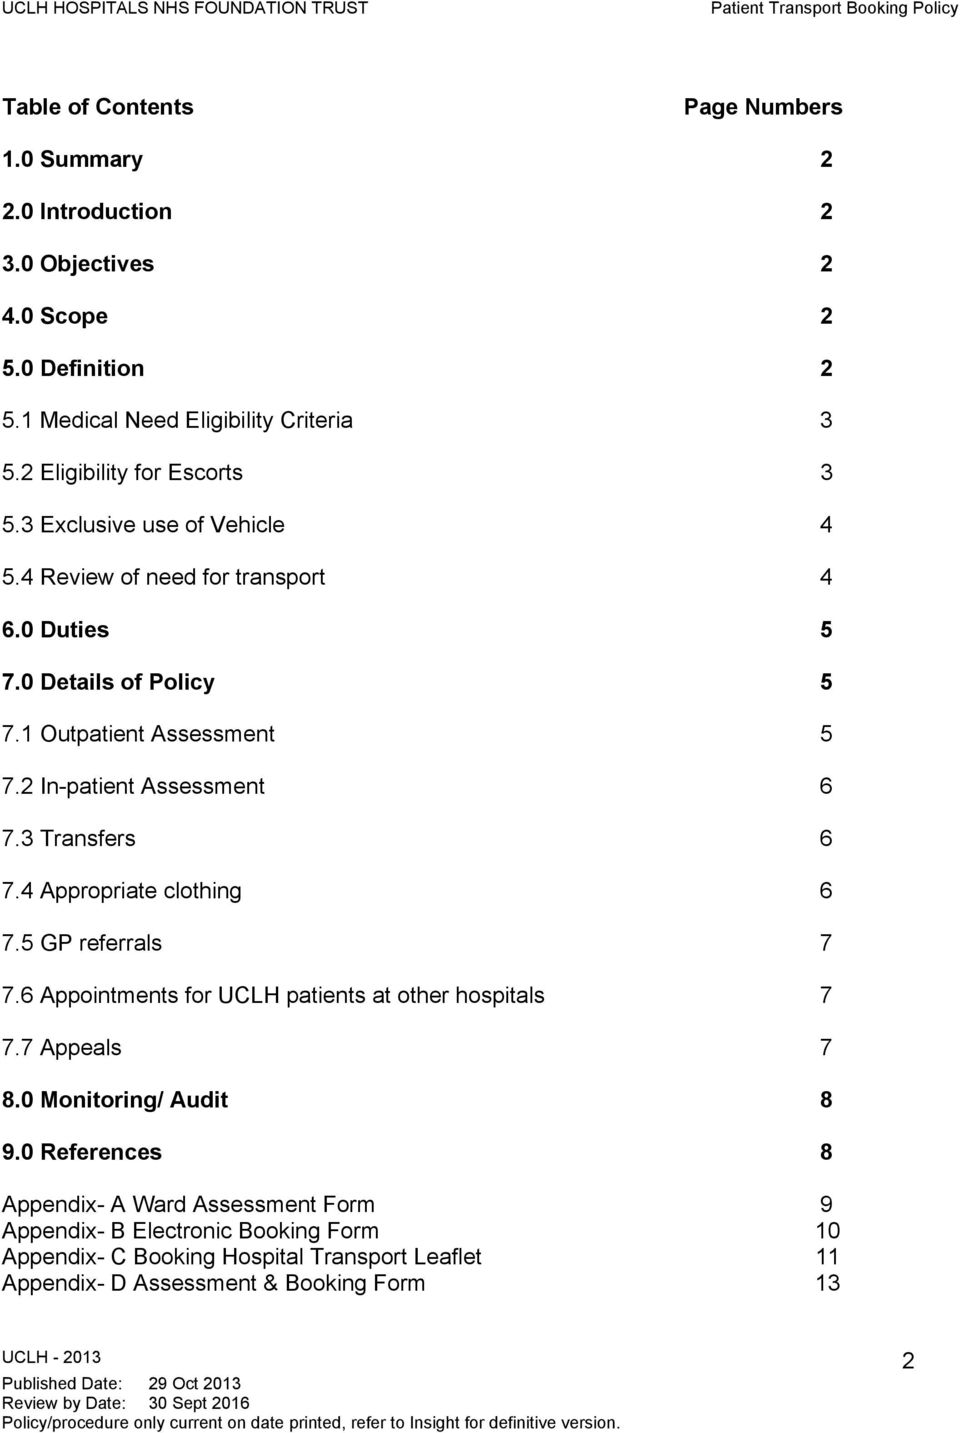 2 In-patient Assessment 6 7.3 Transfers 6 7.4 Appropriate clothing 6 7.5 GP referrals 7 7.6 Appointments for UCLH patients at other hospitals 7 7.7 Appeals 7 8.